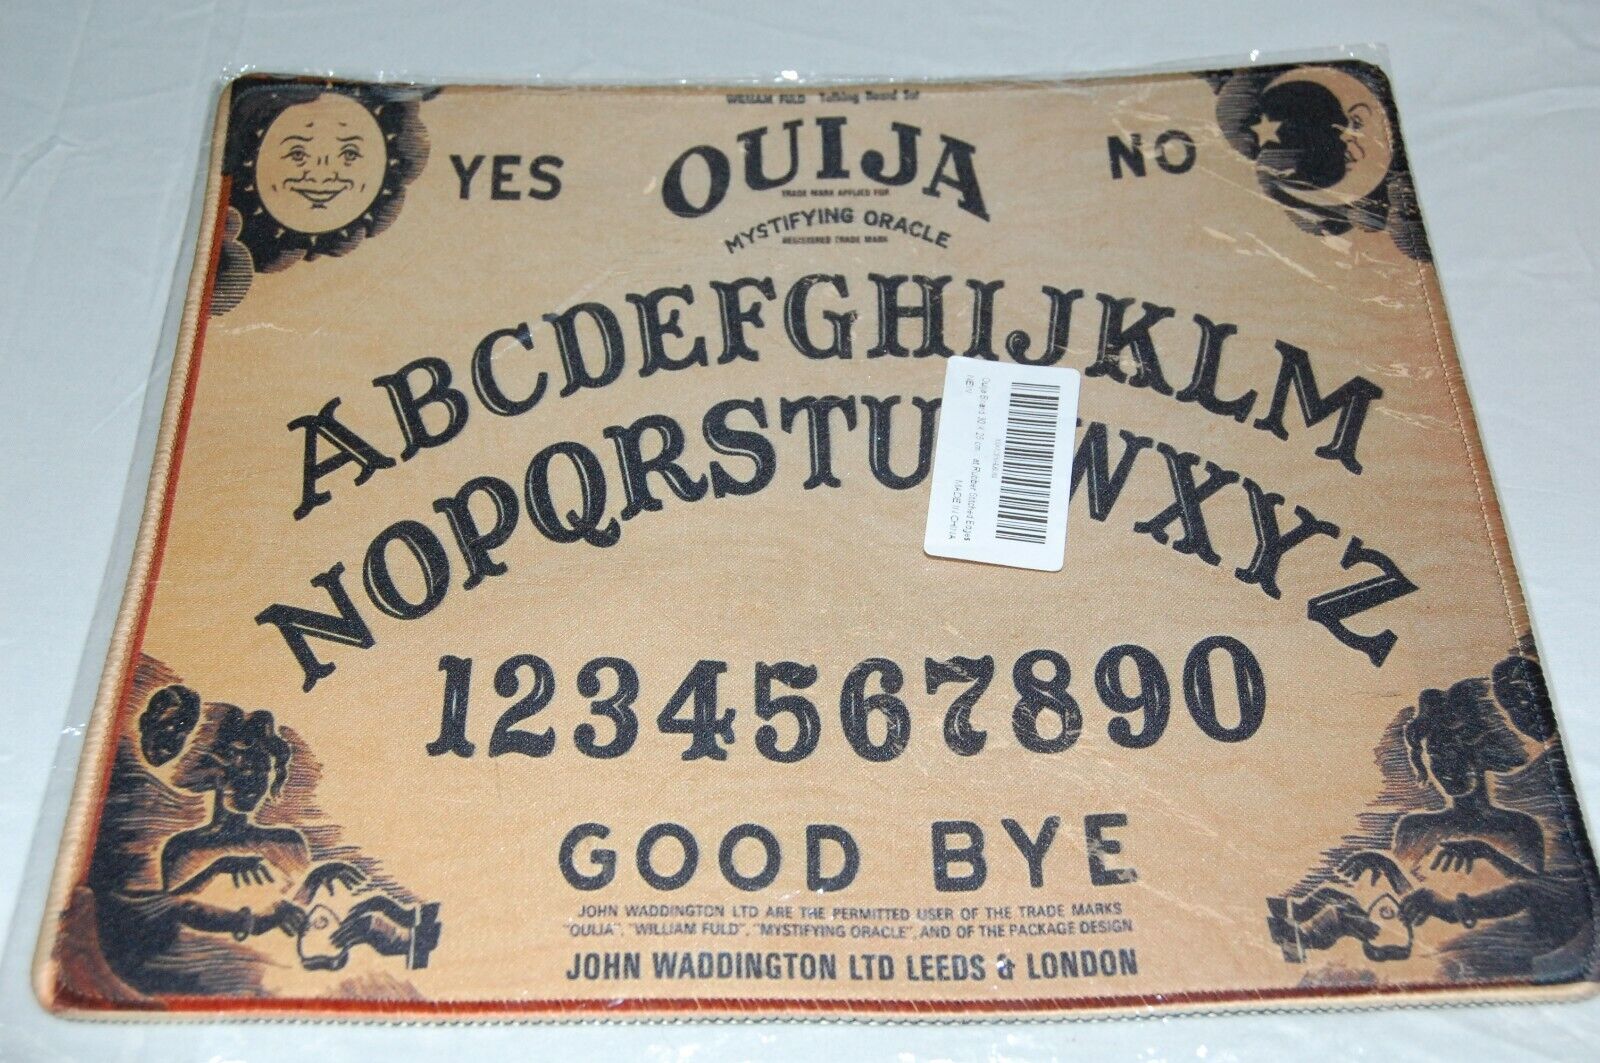 OUIJA BOARD LARGE MOUSE PAD GOODBYE... - NEW IN PACKAGE 